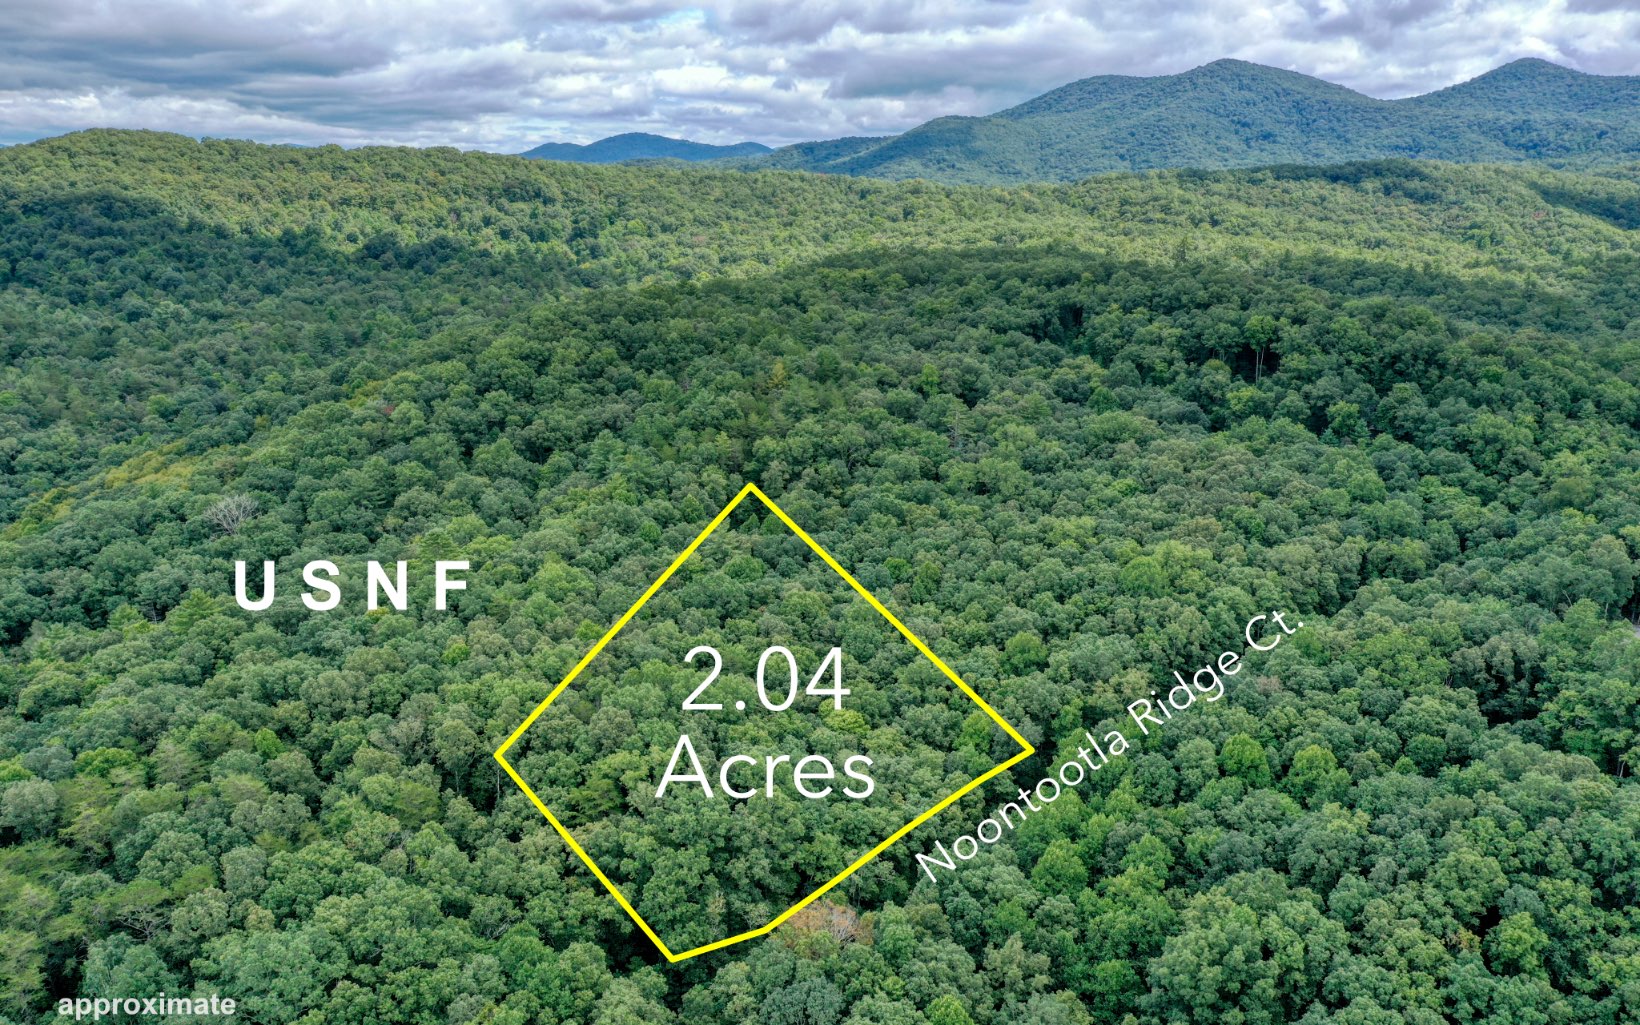 LOOKING TO GET AWAY FROM IT ALL? This beautiful gentle laying lot backs up to USNF at the end of a very private cul-de-sac. Hike and bike on trails through 860 Acres of National Forest right out your back door! Located just minutes from the wildly popular "Aska Adventure Area", Toccoa River, and other outdoor activities. NOONTOOTLA CREEK just a short walk away. Underground Utilities.